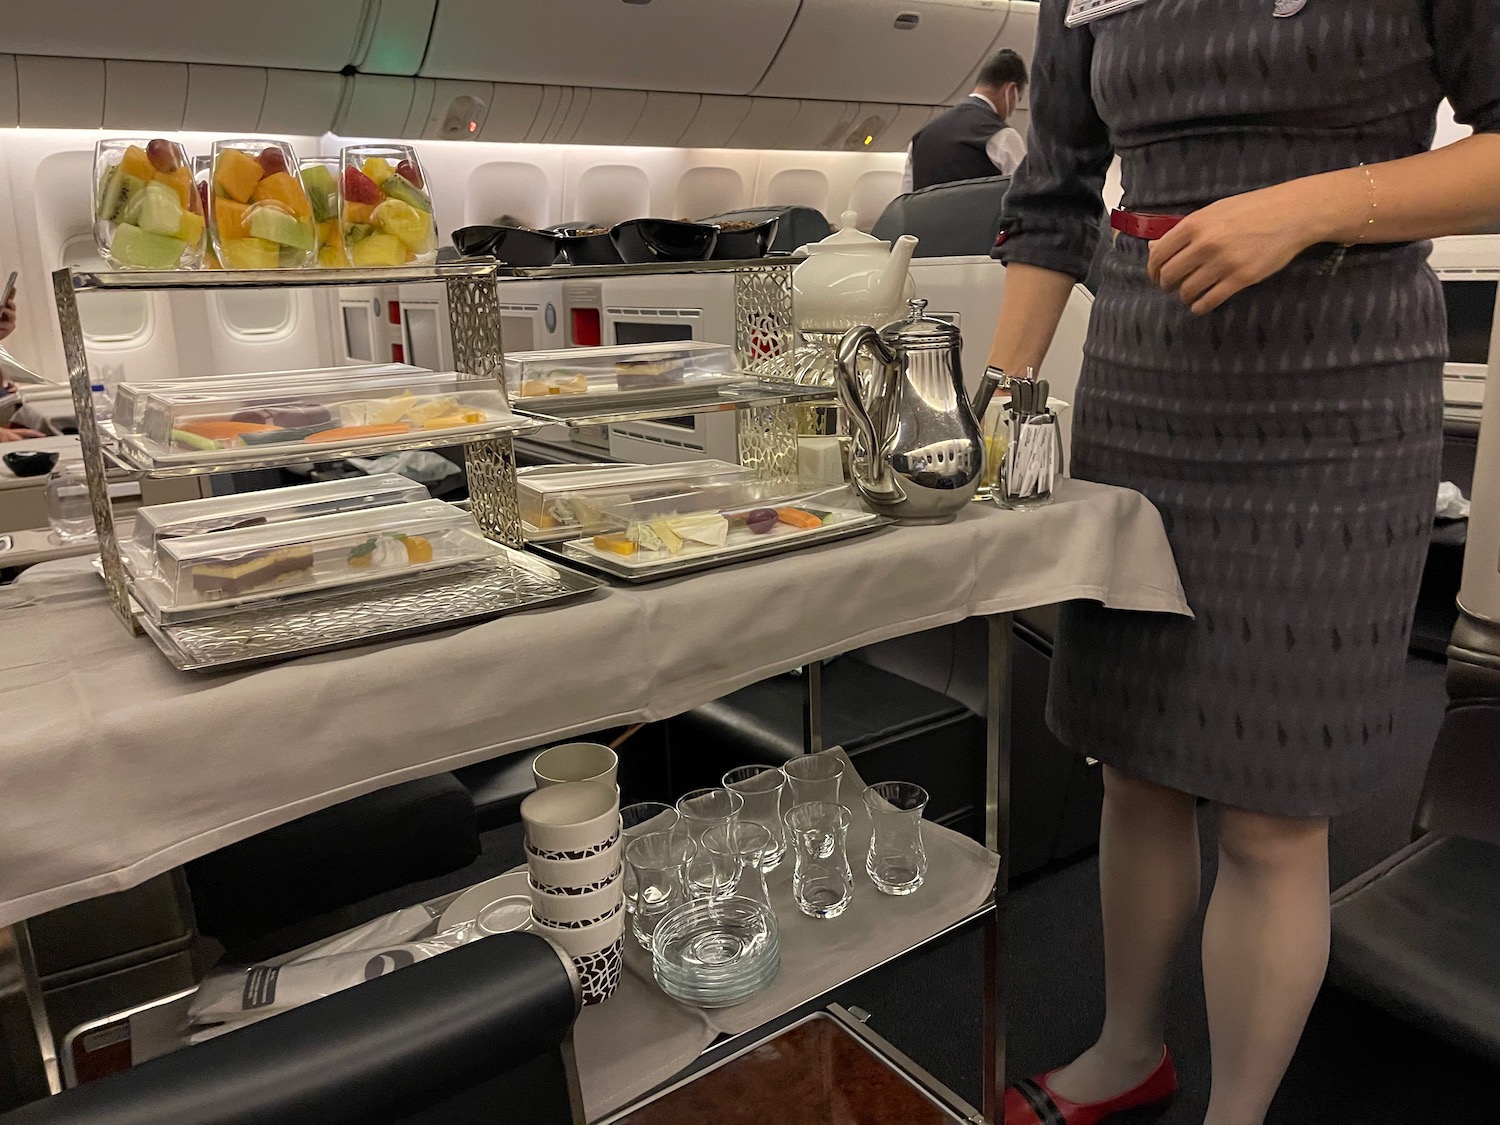 a woman standing in an airplane with trays of food